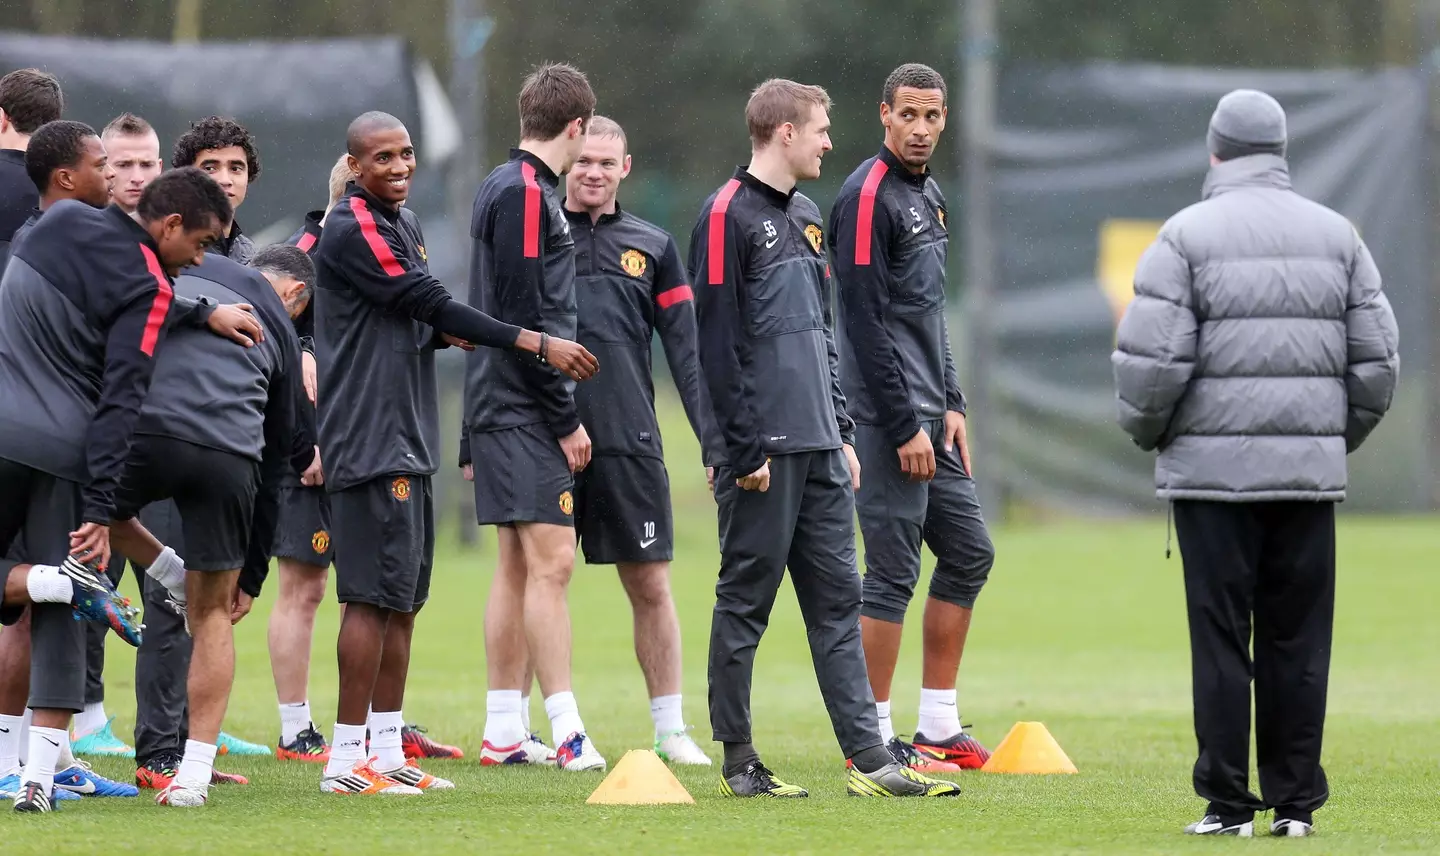 Ferguson runs a training session with Young and the United squad. Image: Alamy